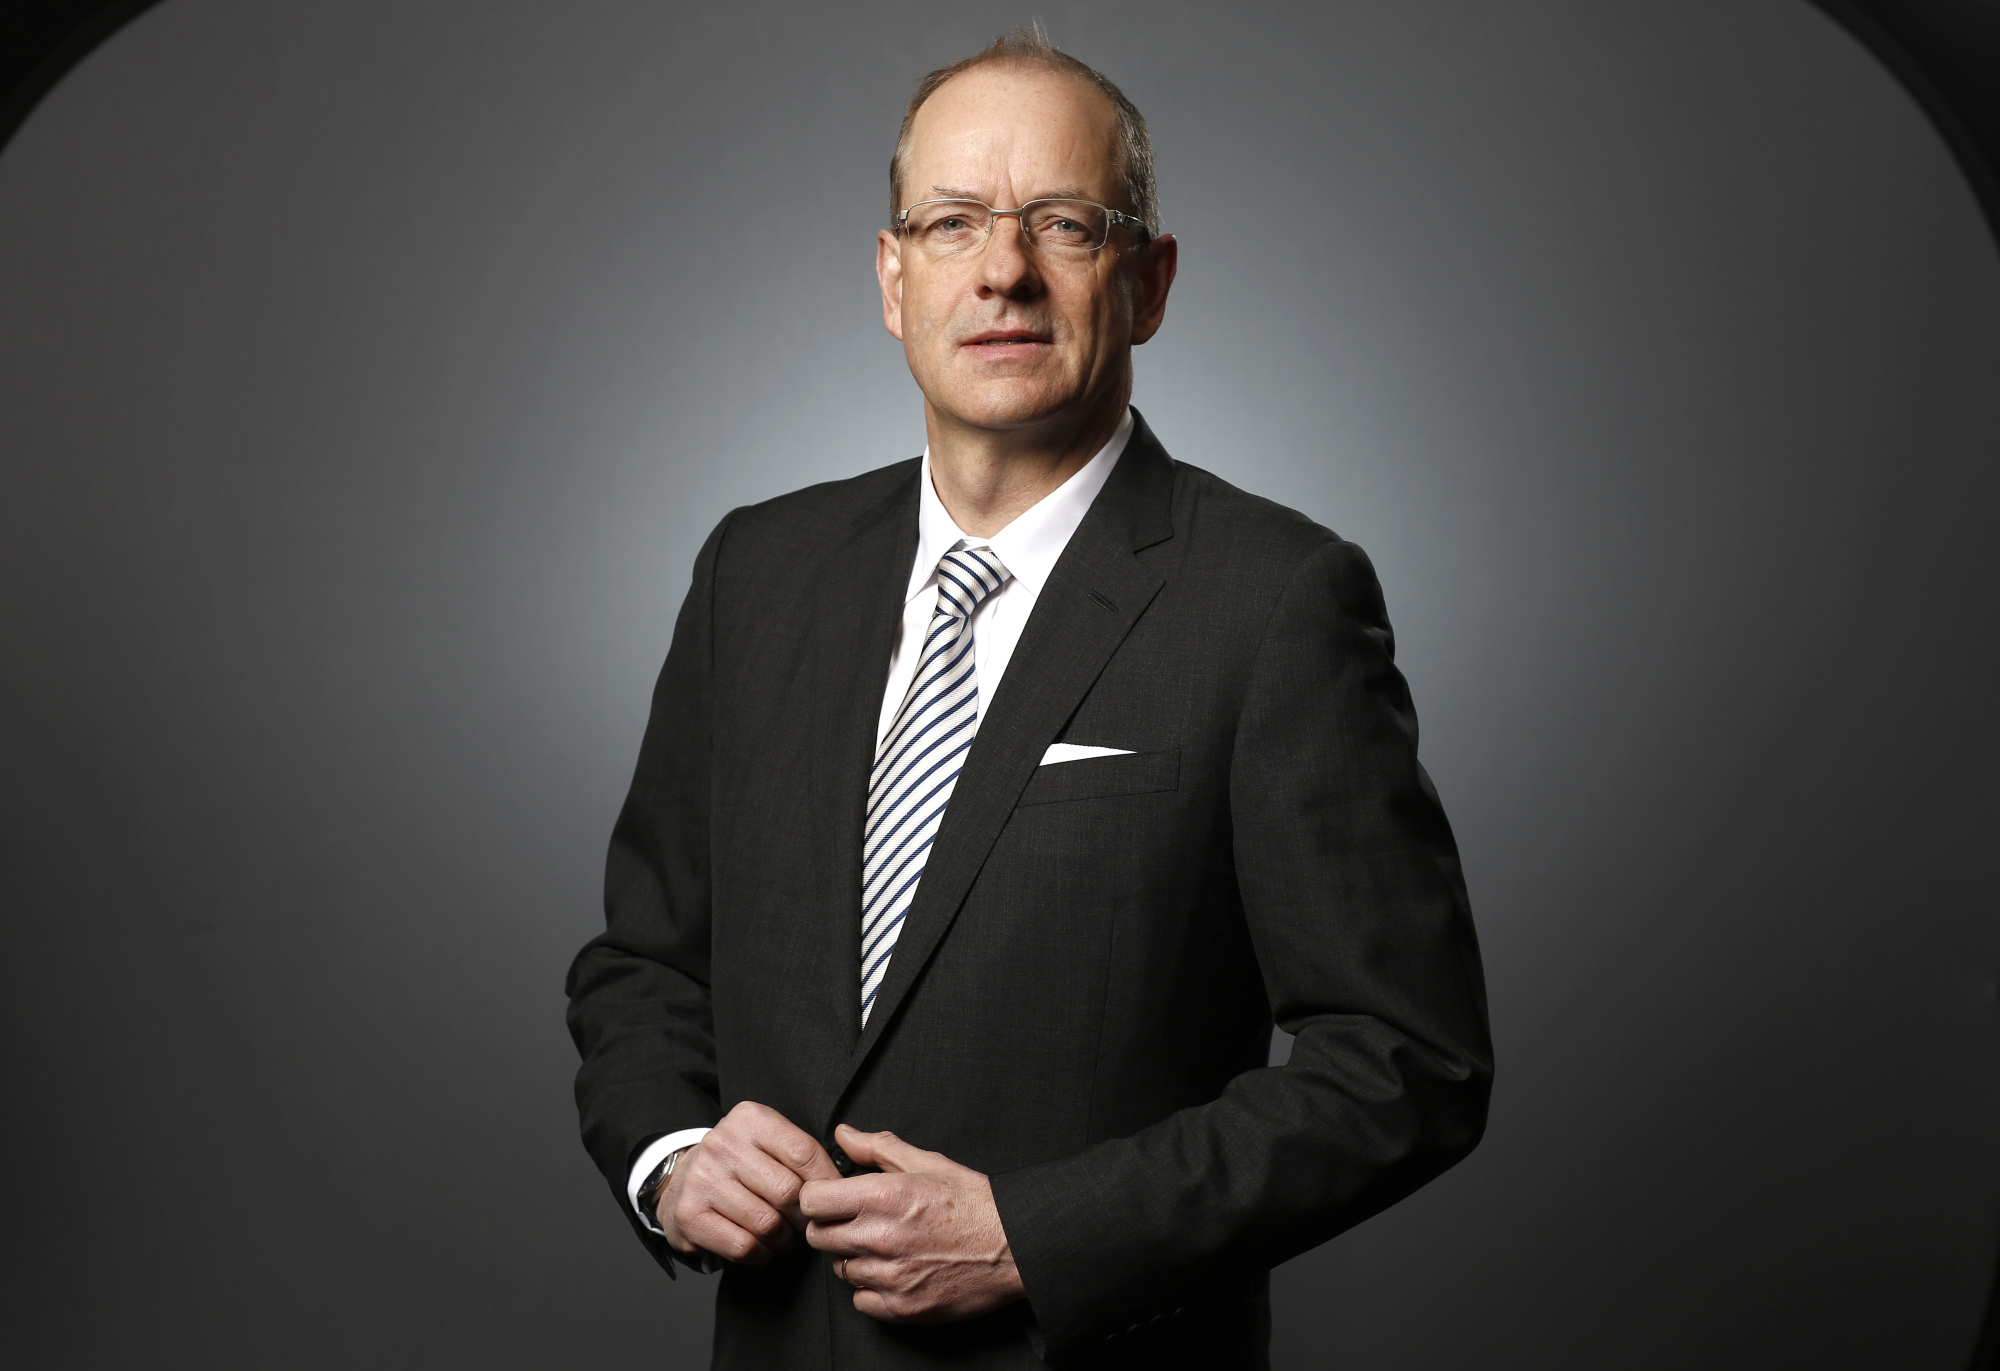 GlaxoSmithKline CEO Andrew Witty to Retire in March 2017 Bloomberg